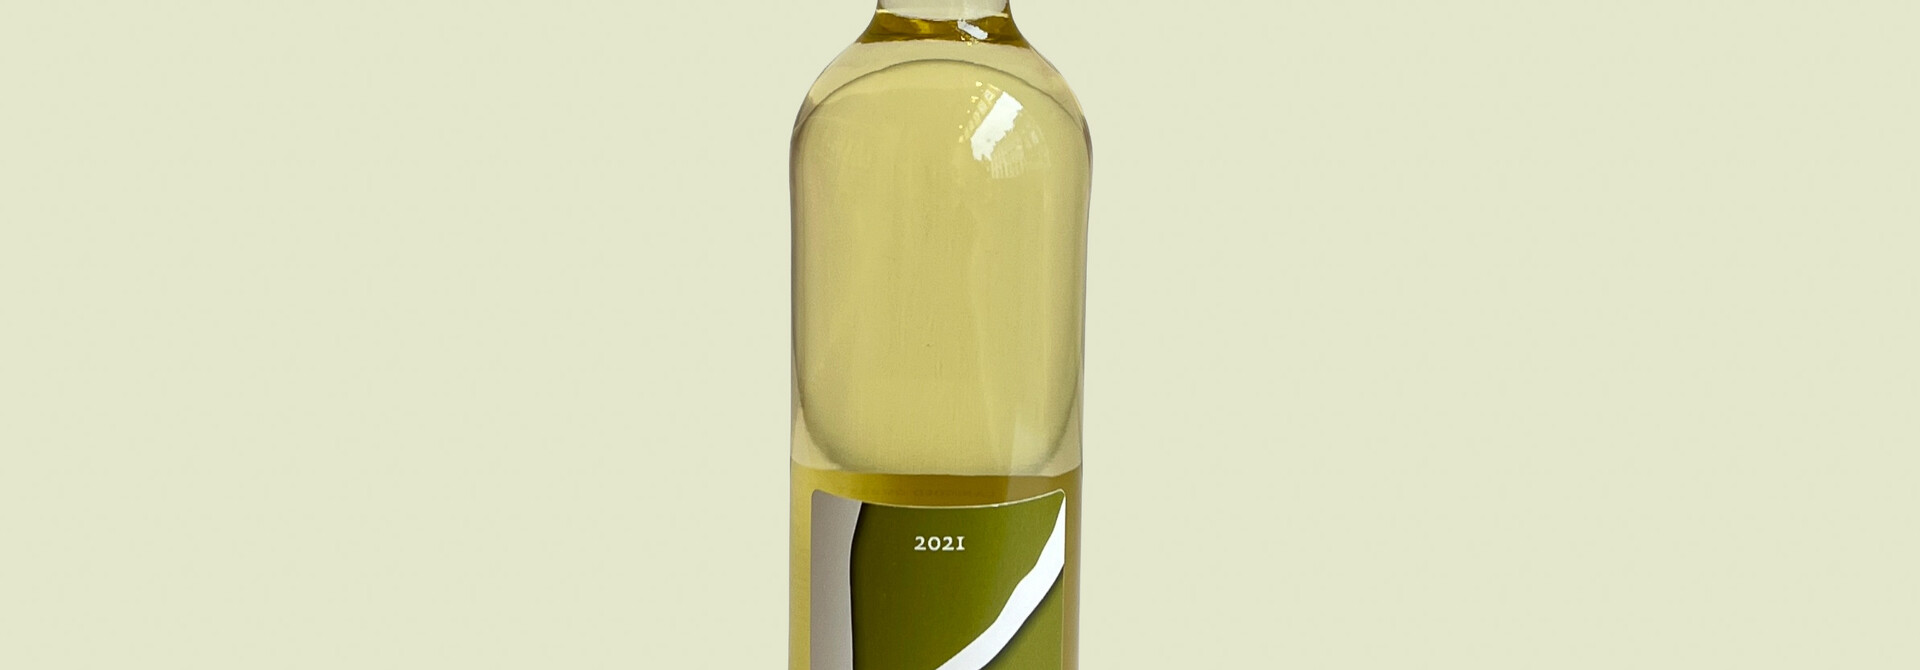 Overst Riesling 2021